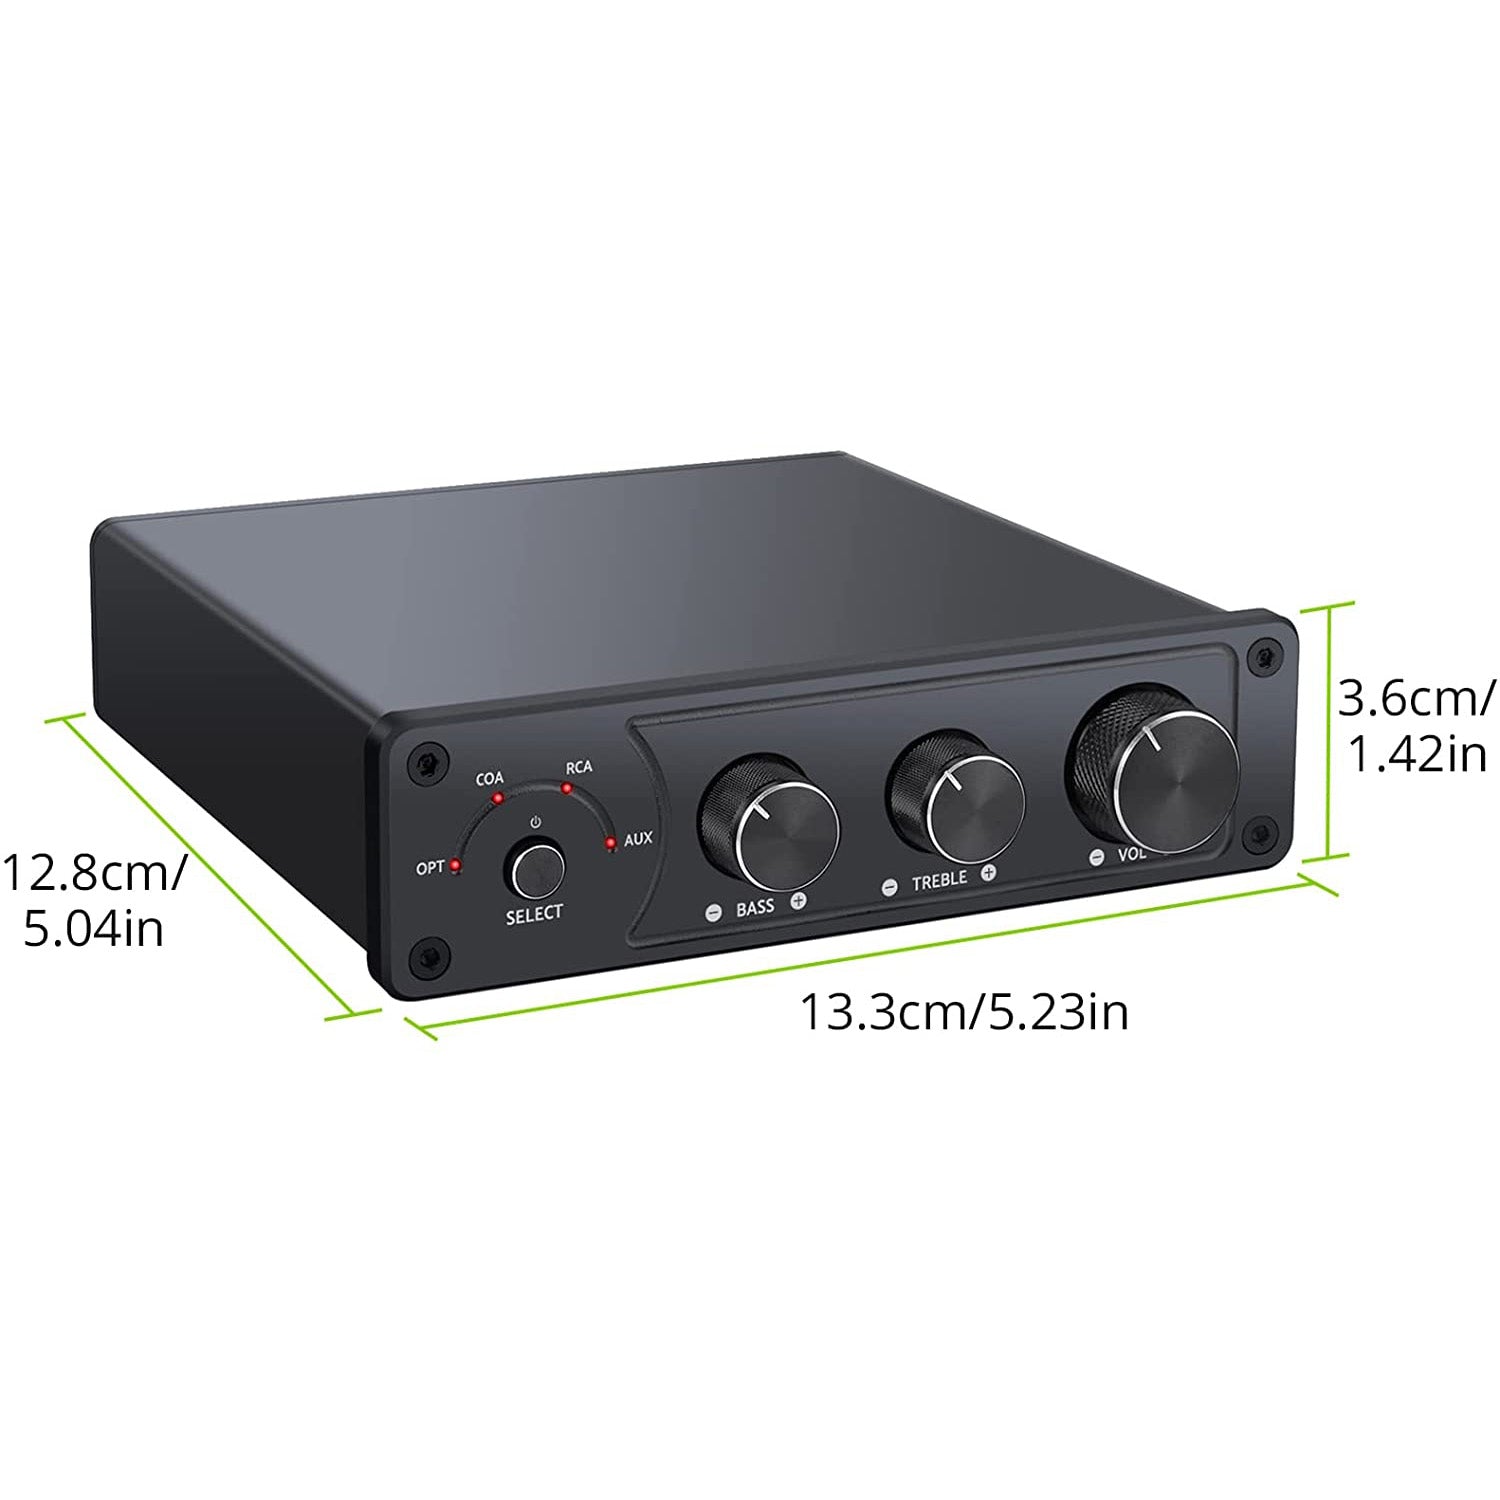 LiNKFOR Hi-Fi Stereo Audio Amplifier + DAC – LiNKFOR Store